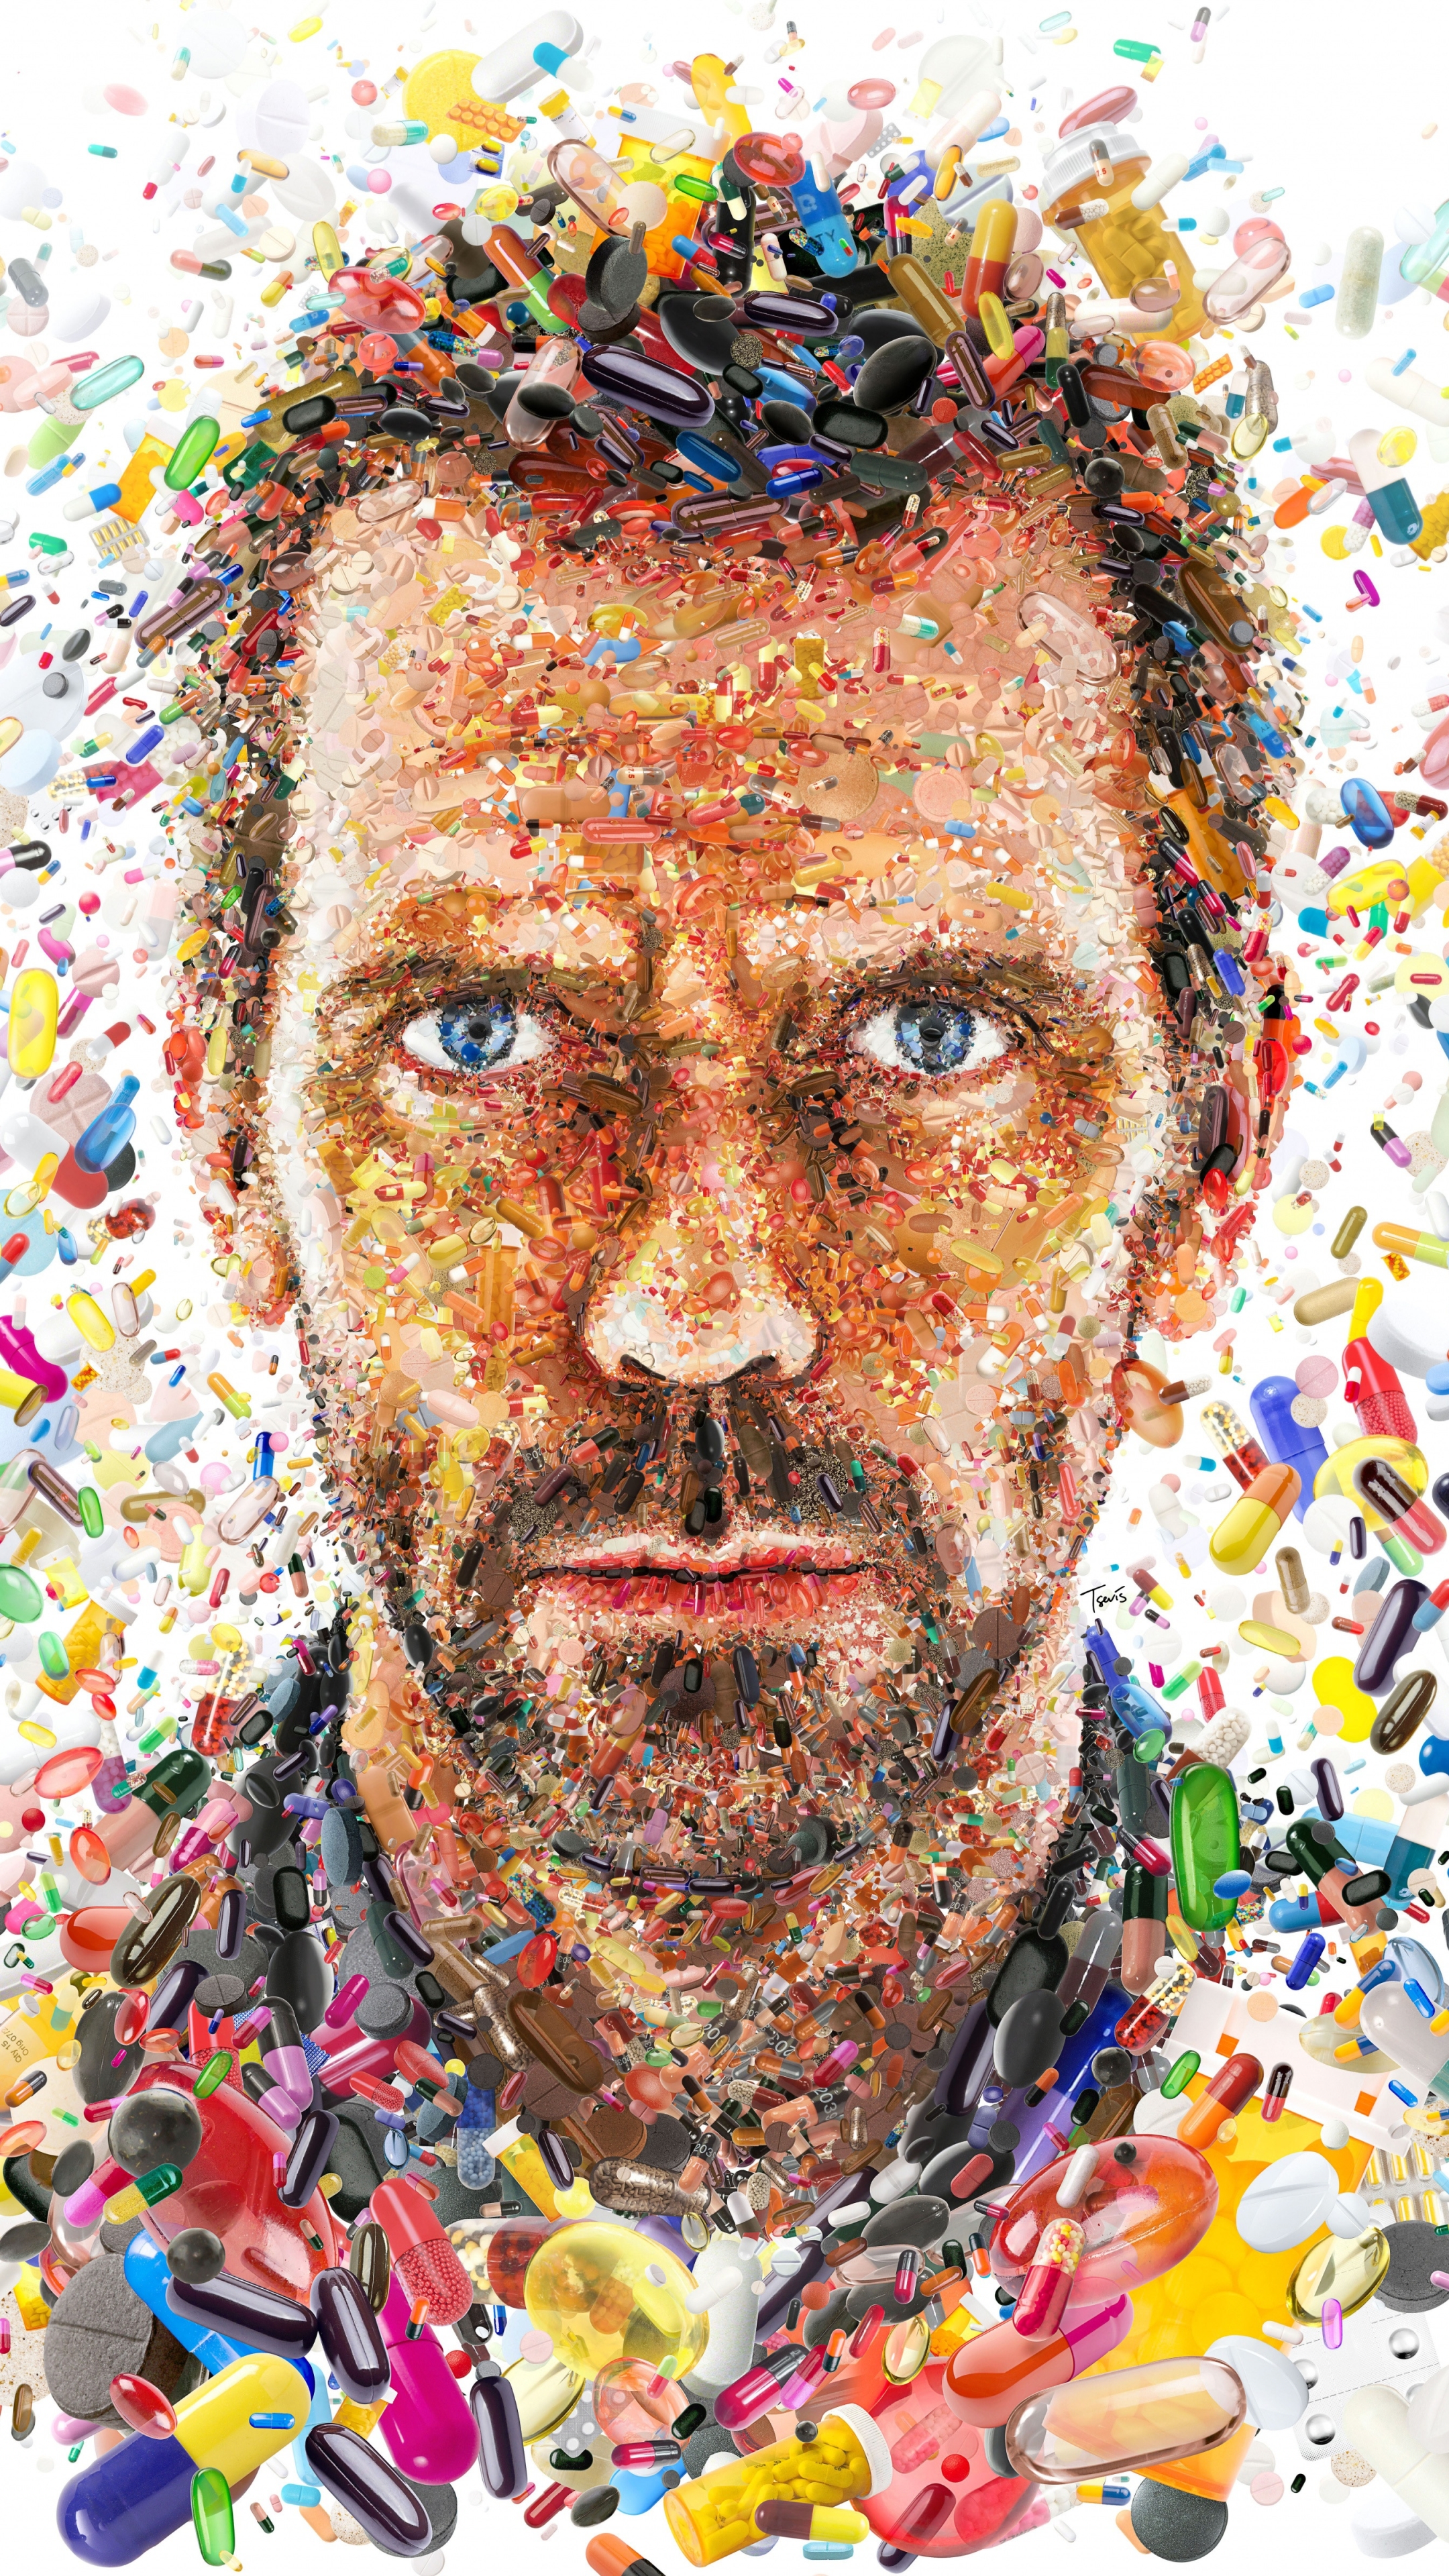 tv show, house, colors, gregory house, hugh laurie, pills